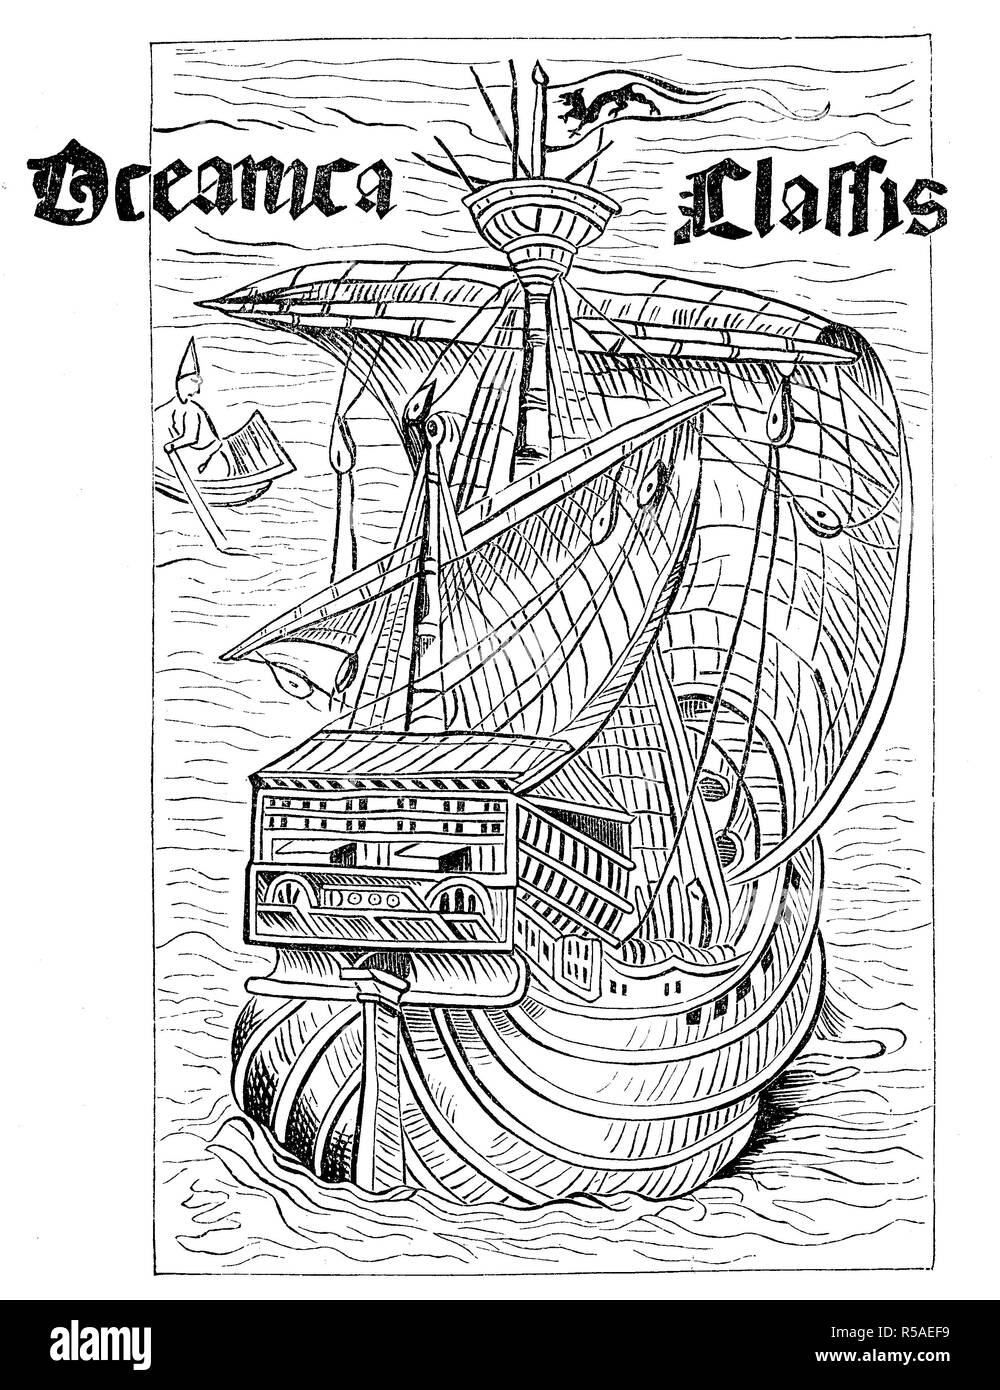 Drawing of a Spanish ship from the time of the discovery of America around 1492, woodcut, Spain Stock Photo